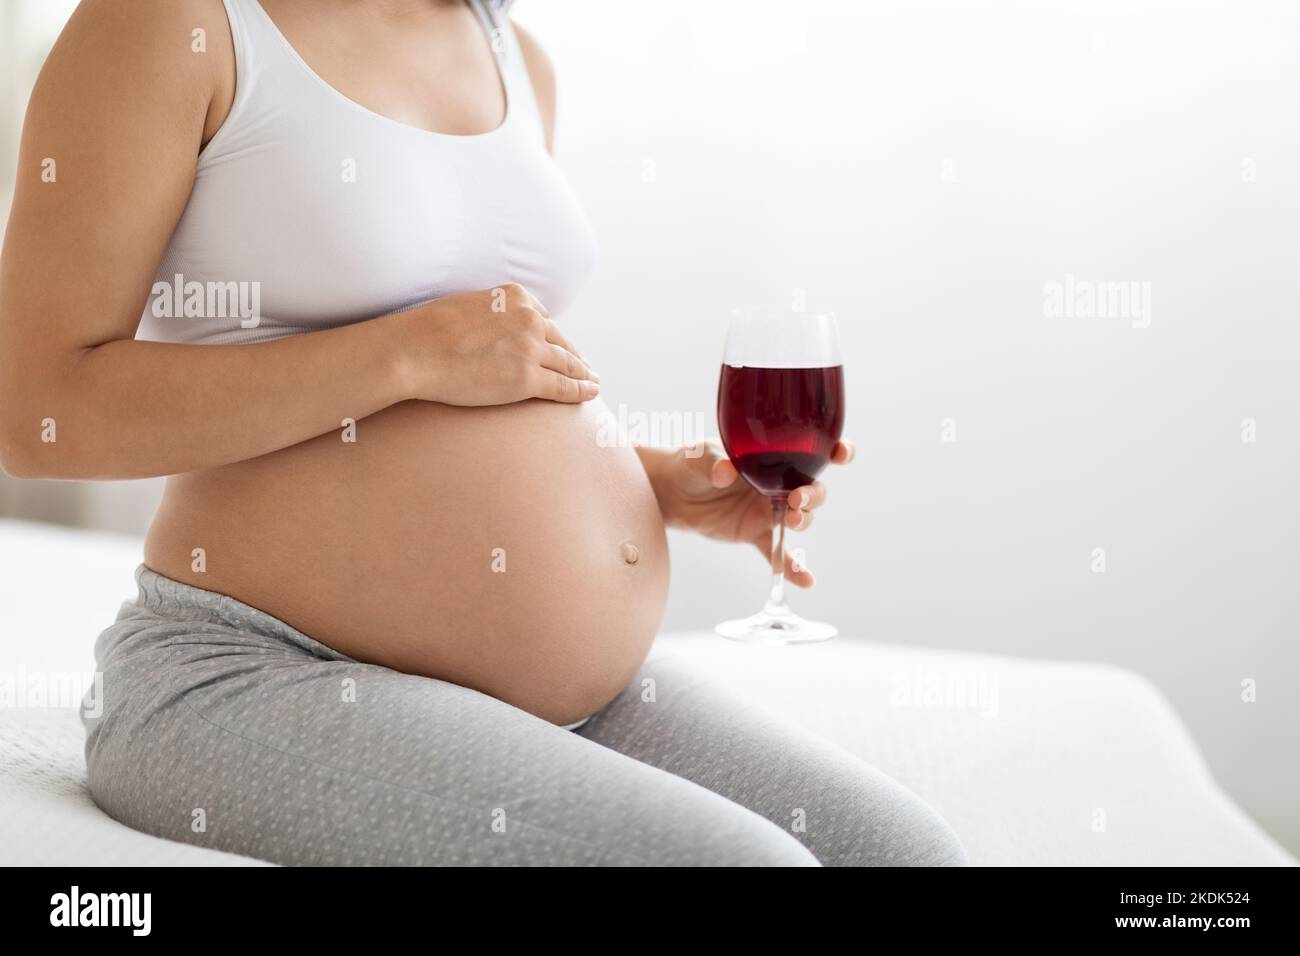 Unrecognizable pregnant woman holding glass of red wine, cropped Stock Photo